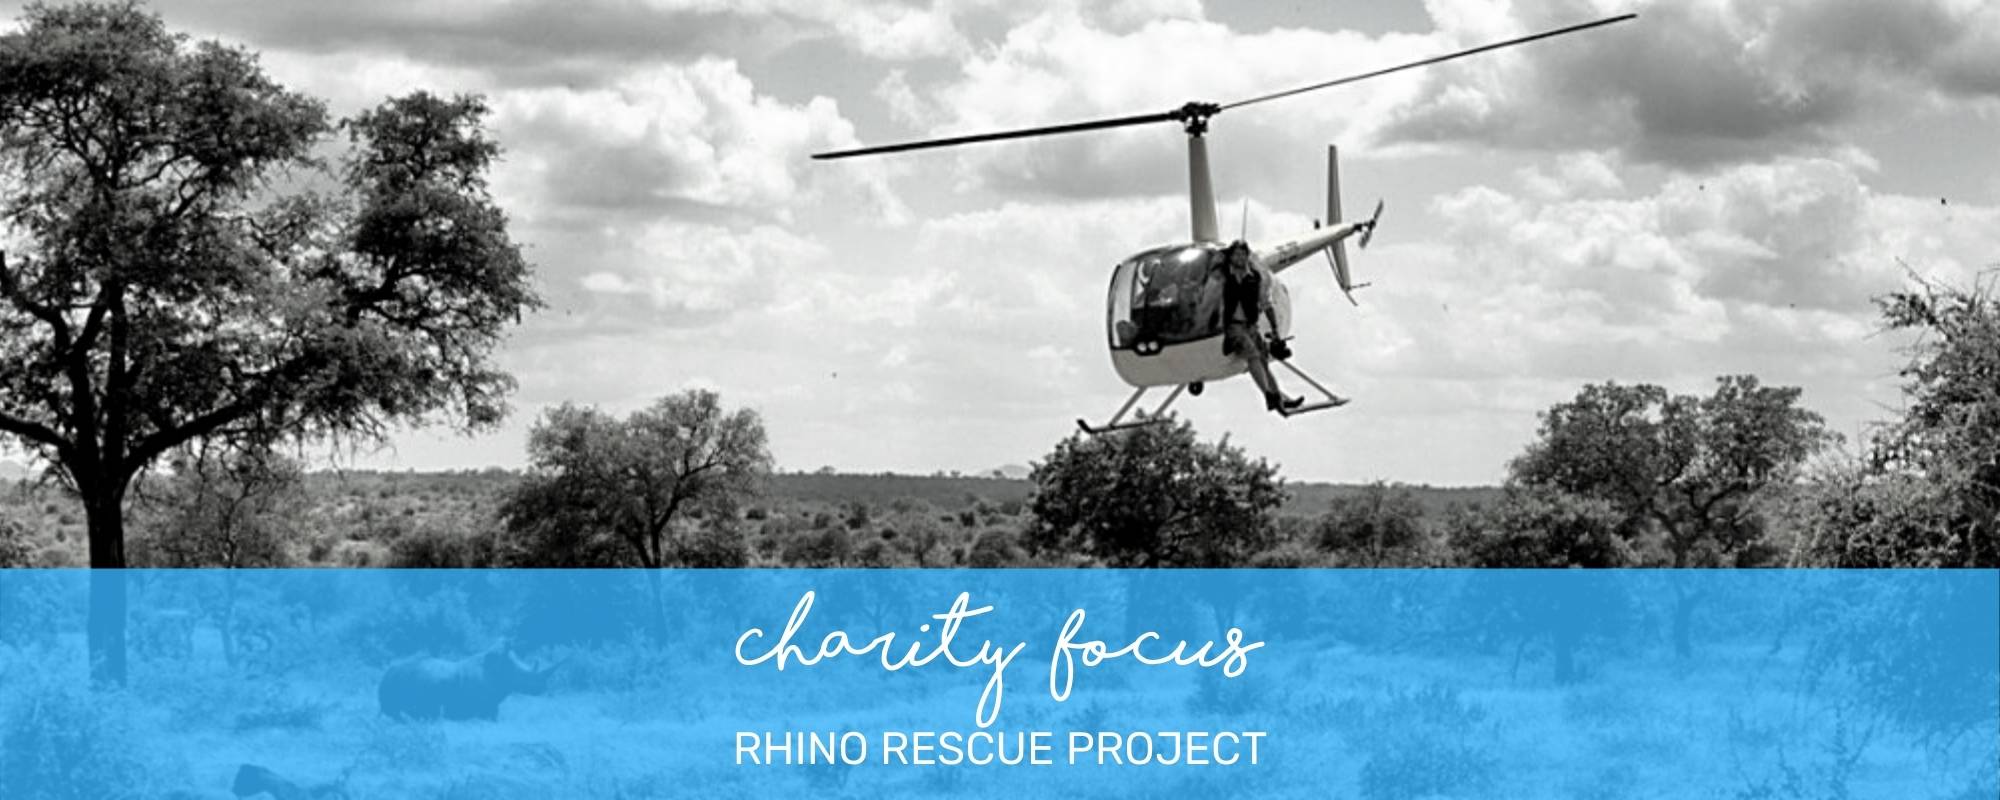 CHARITY FOCUS: RHINO RESCUE PROJECT